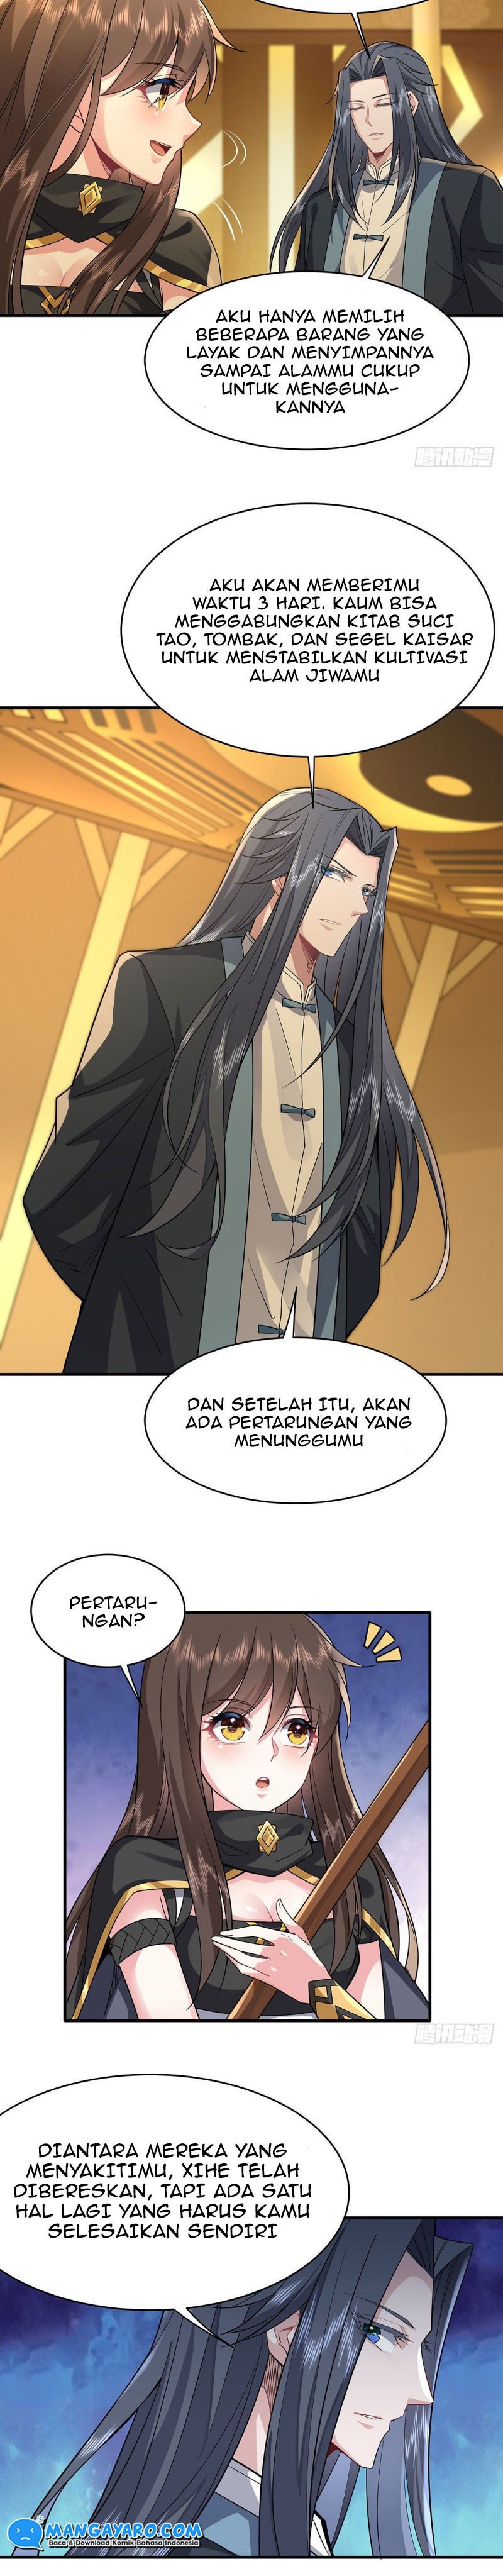 Dilarang COPAS - situs resmi www.mangacanblog.com - Komik my female apprentices are all big shots from the future 031 - chapter 31 32 Indonesia my female apprentices are all big shots from the future 031 - chapter 31 Terbaru 17|Baca Manga Komik Indonesia|Mangacan